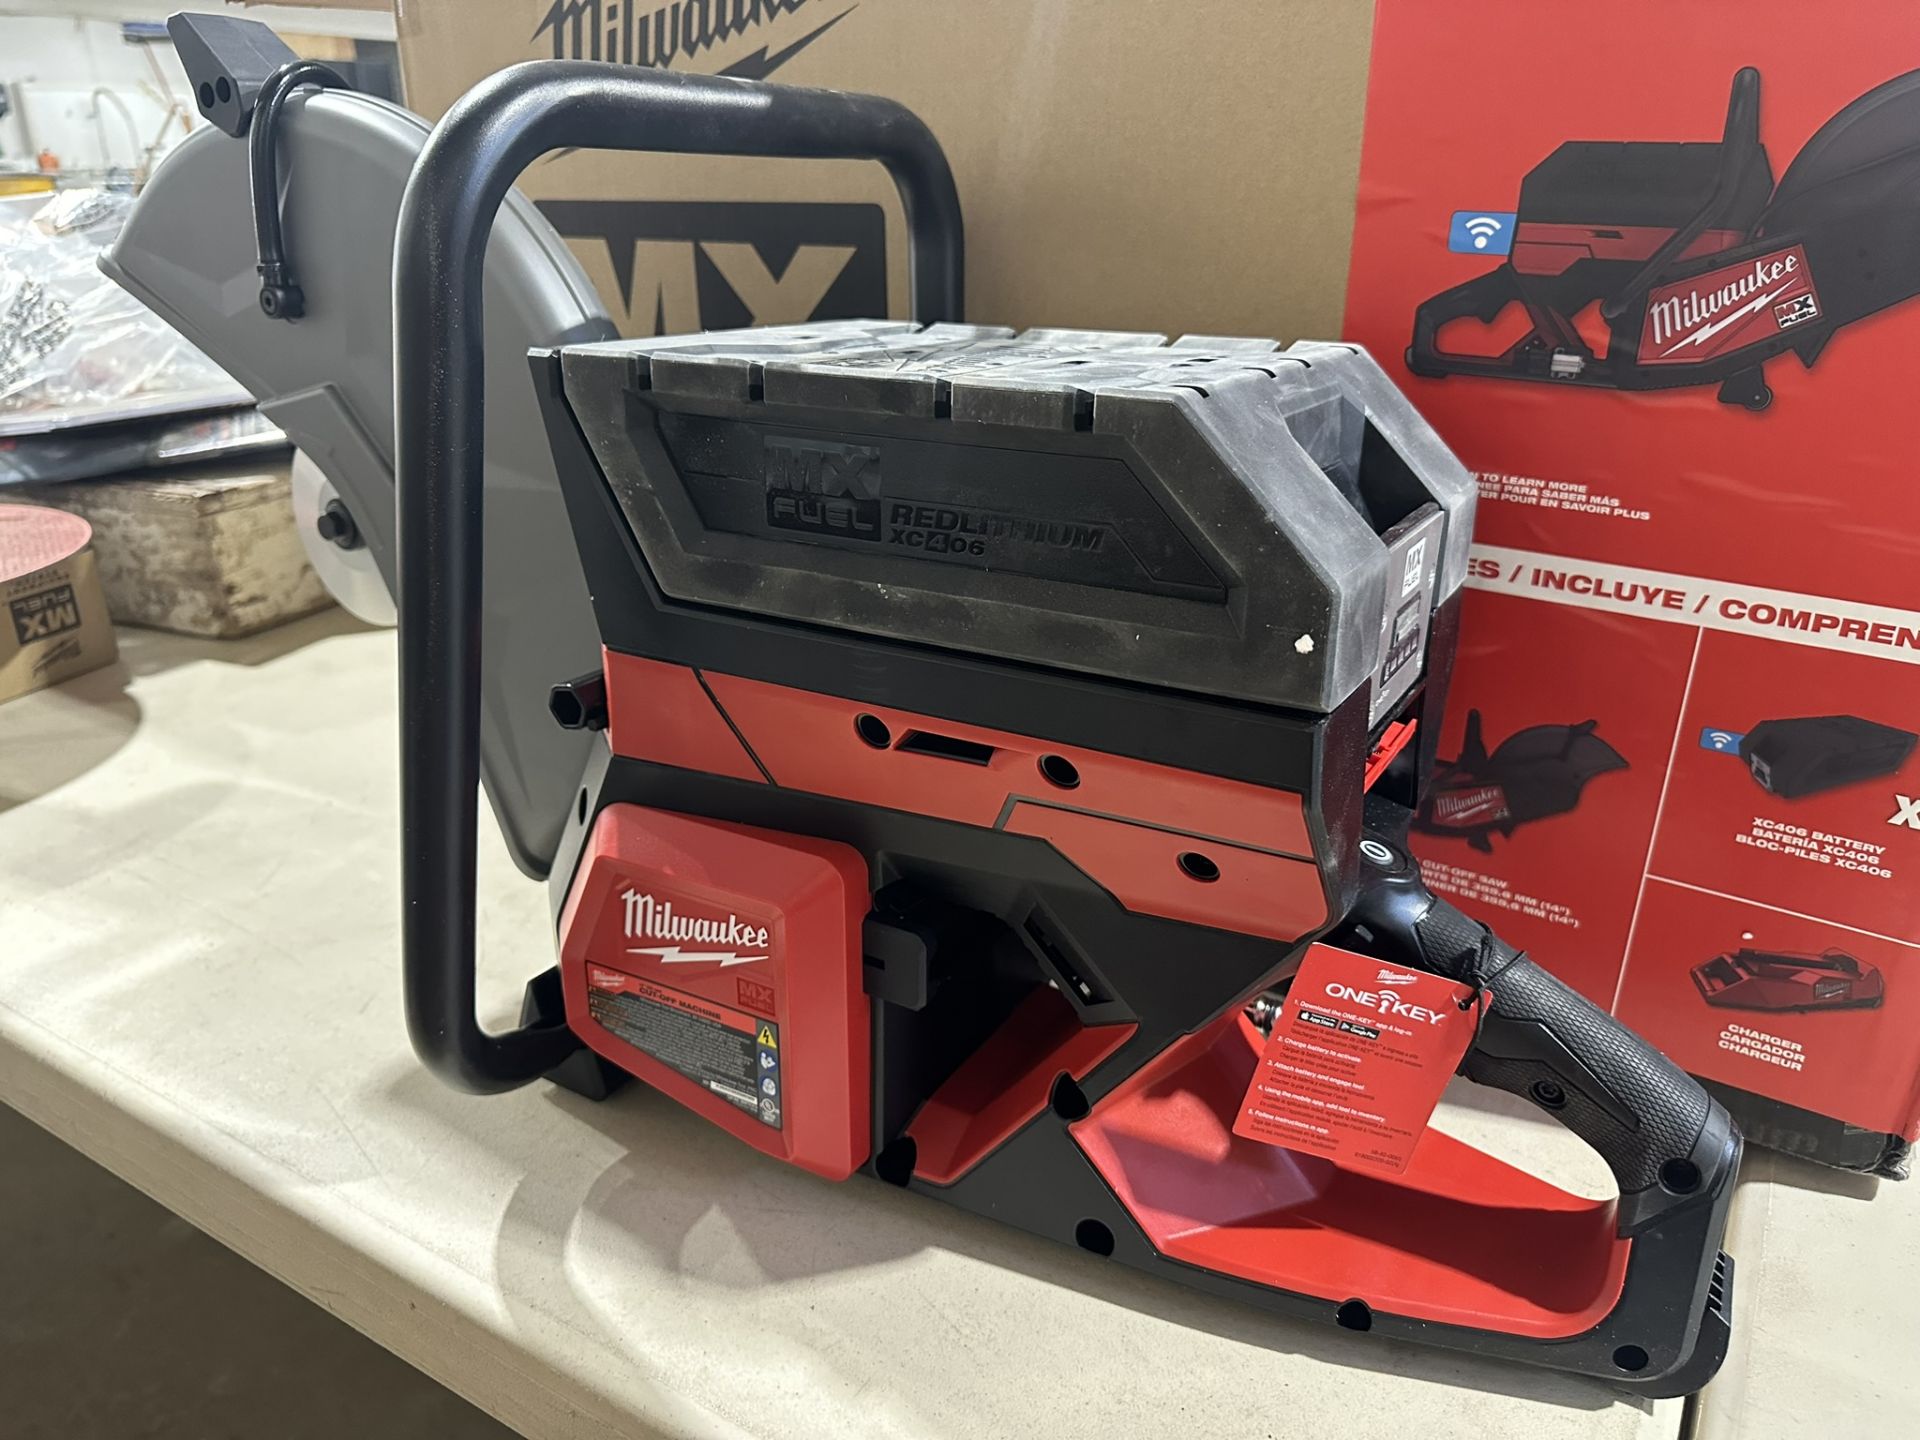 MILWAUKEE MXF314-2XC CORDLESS 14" DEMOLITION SAW W/ 2 XC406 BATTERIES AND CHARGER (NEW IN BOX) - Image 8 of 8